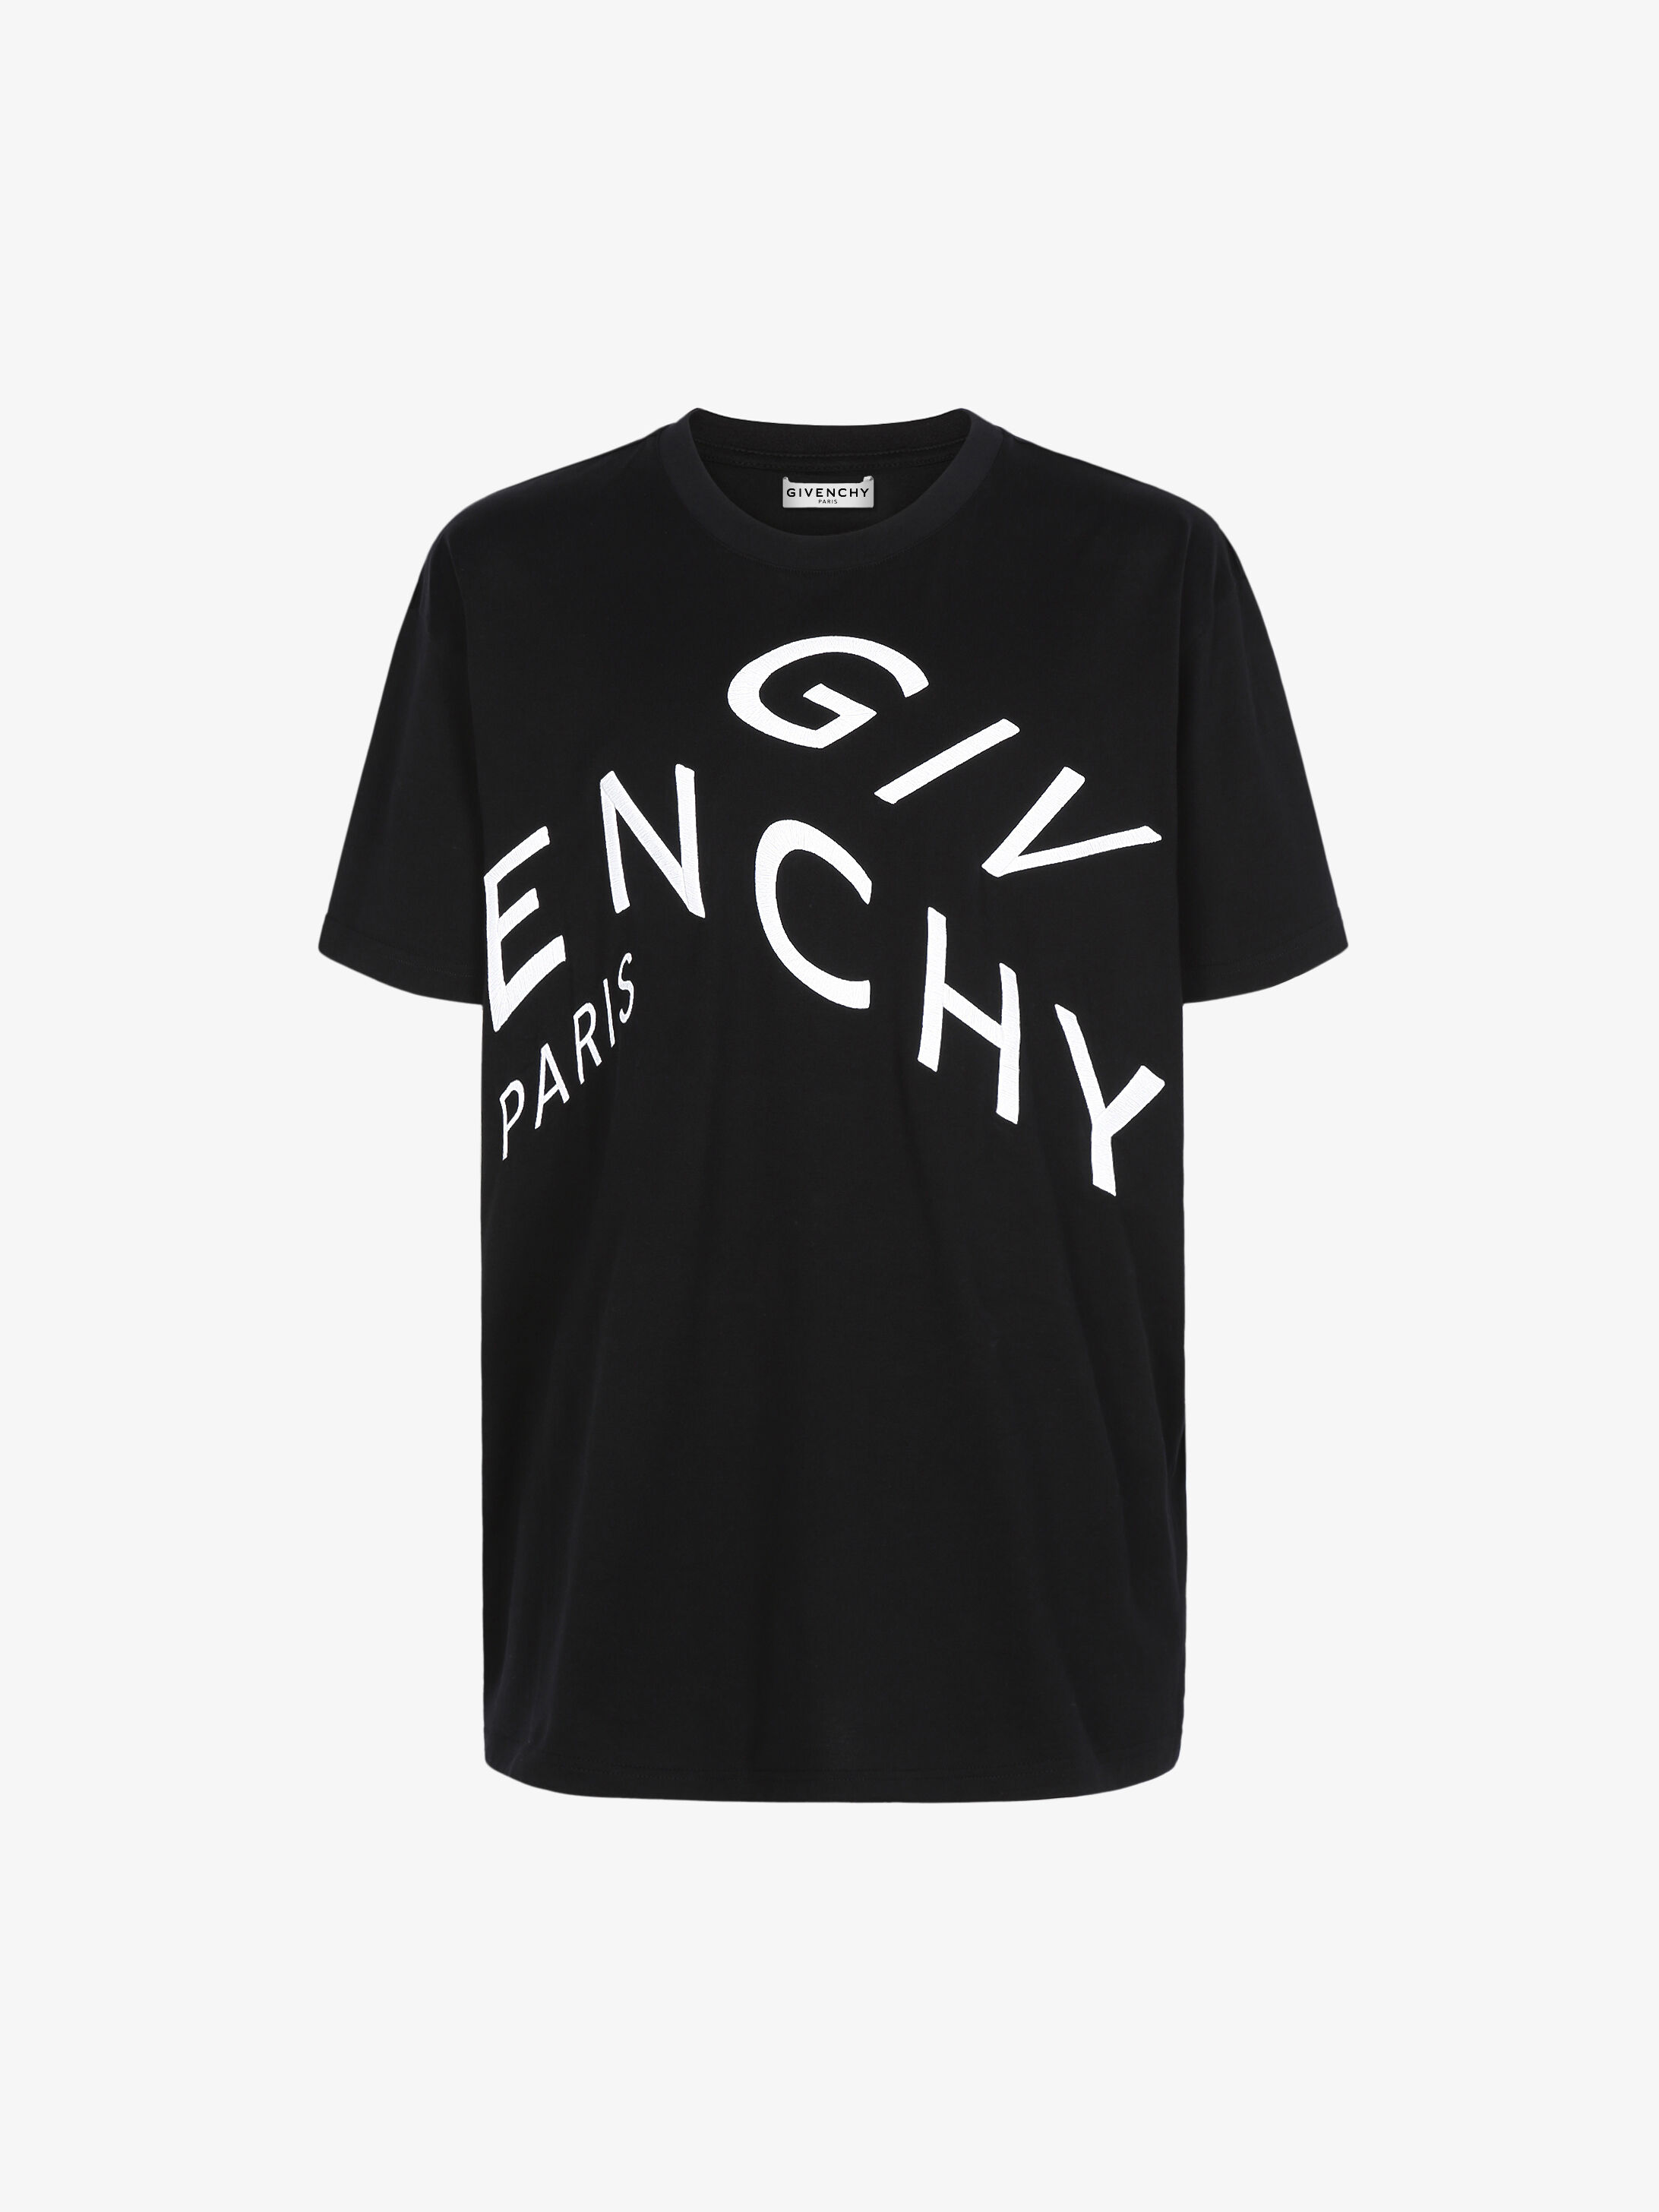 givenchy t shirt price